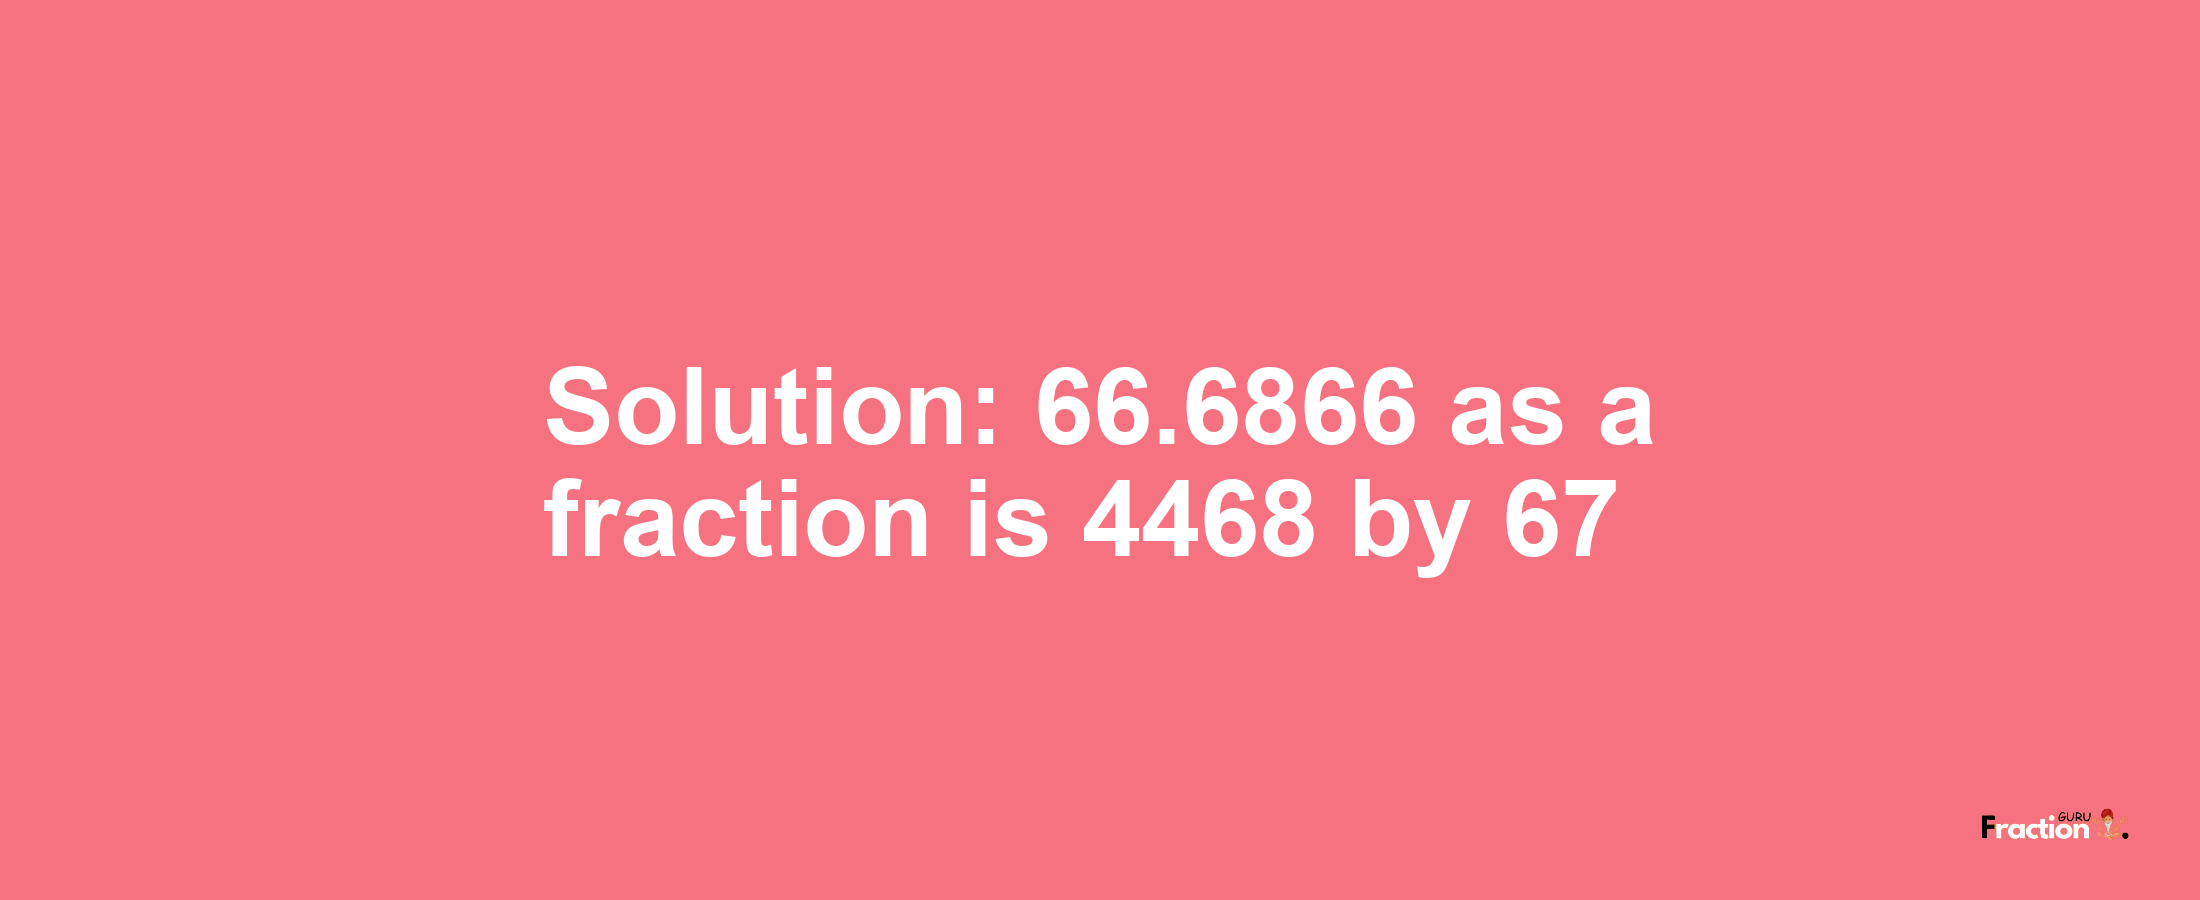 Solution:66.6866 as a fraction is 4468/67